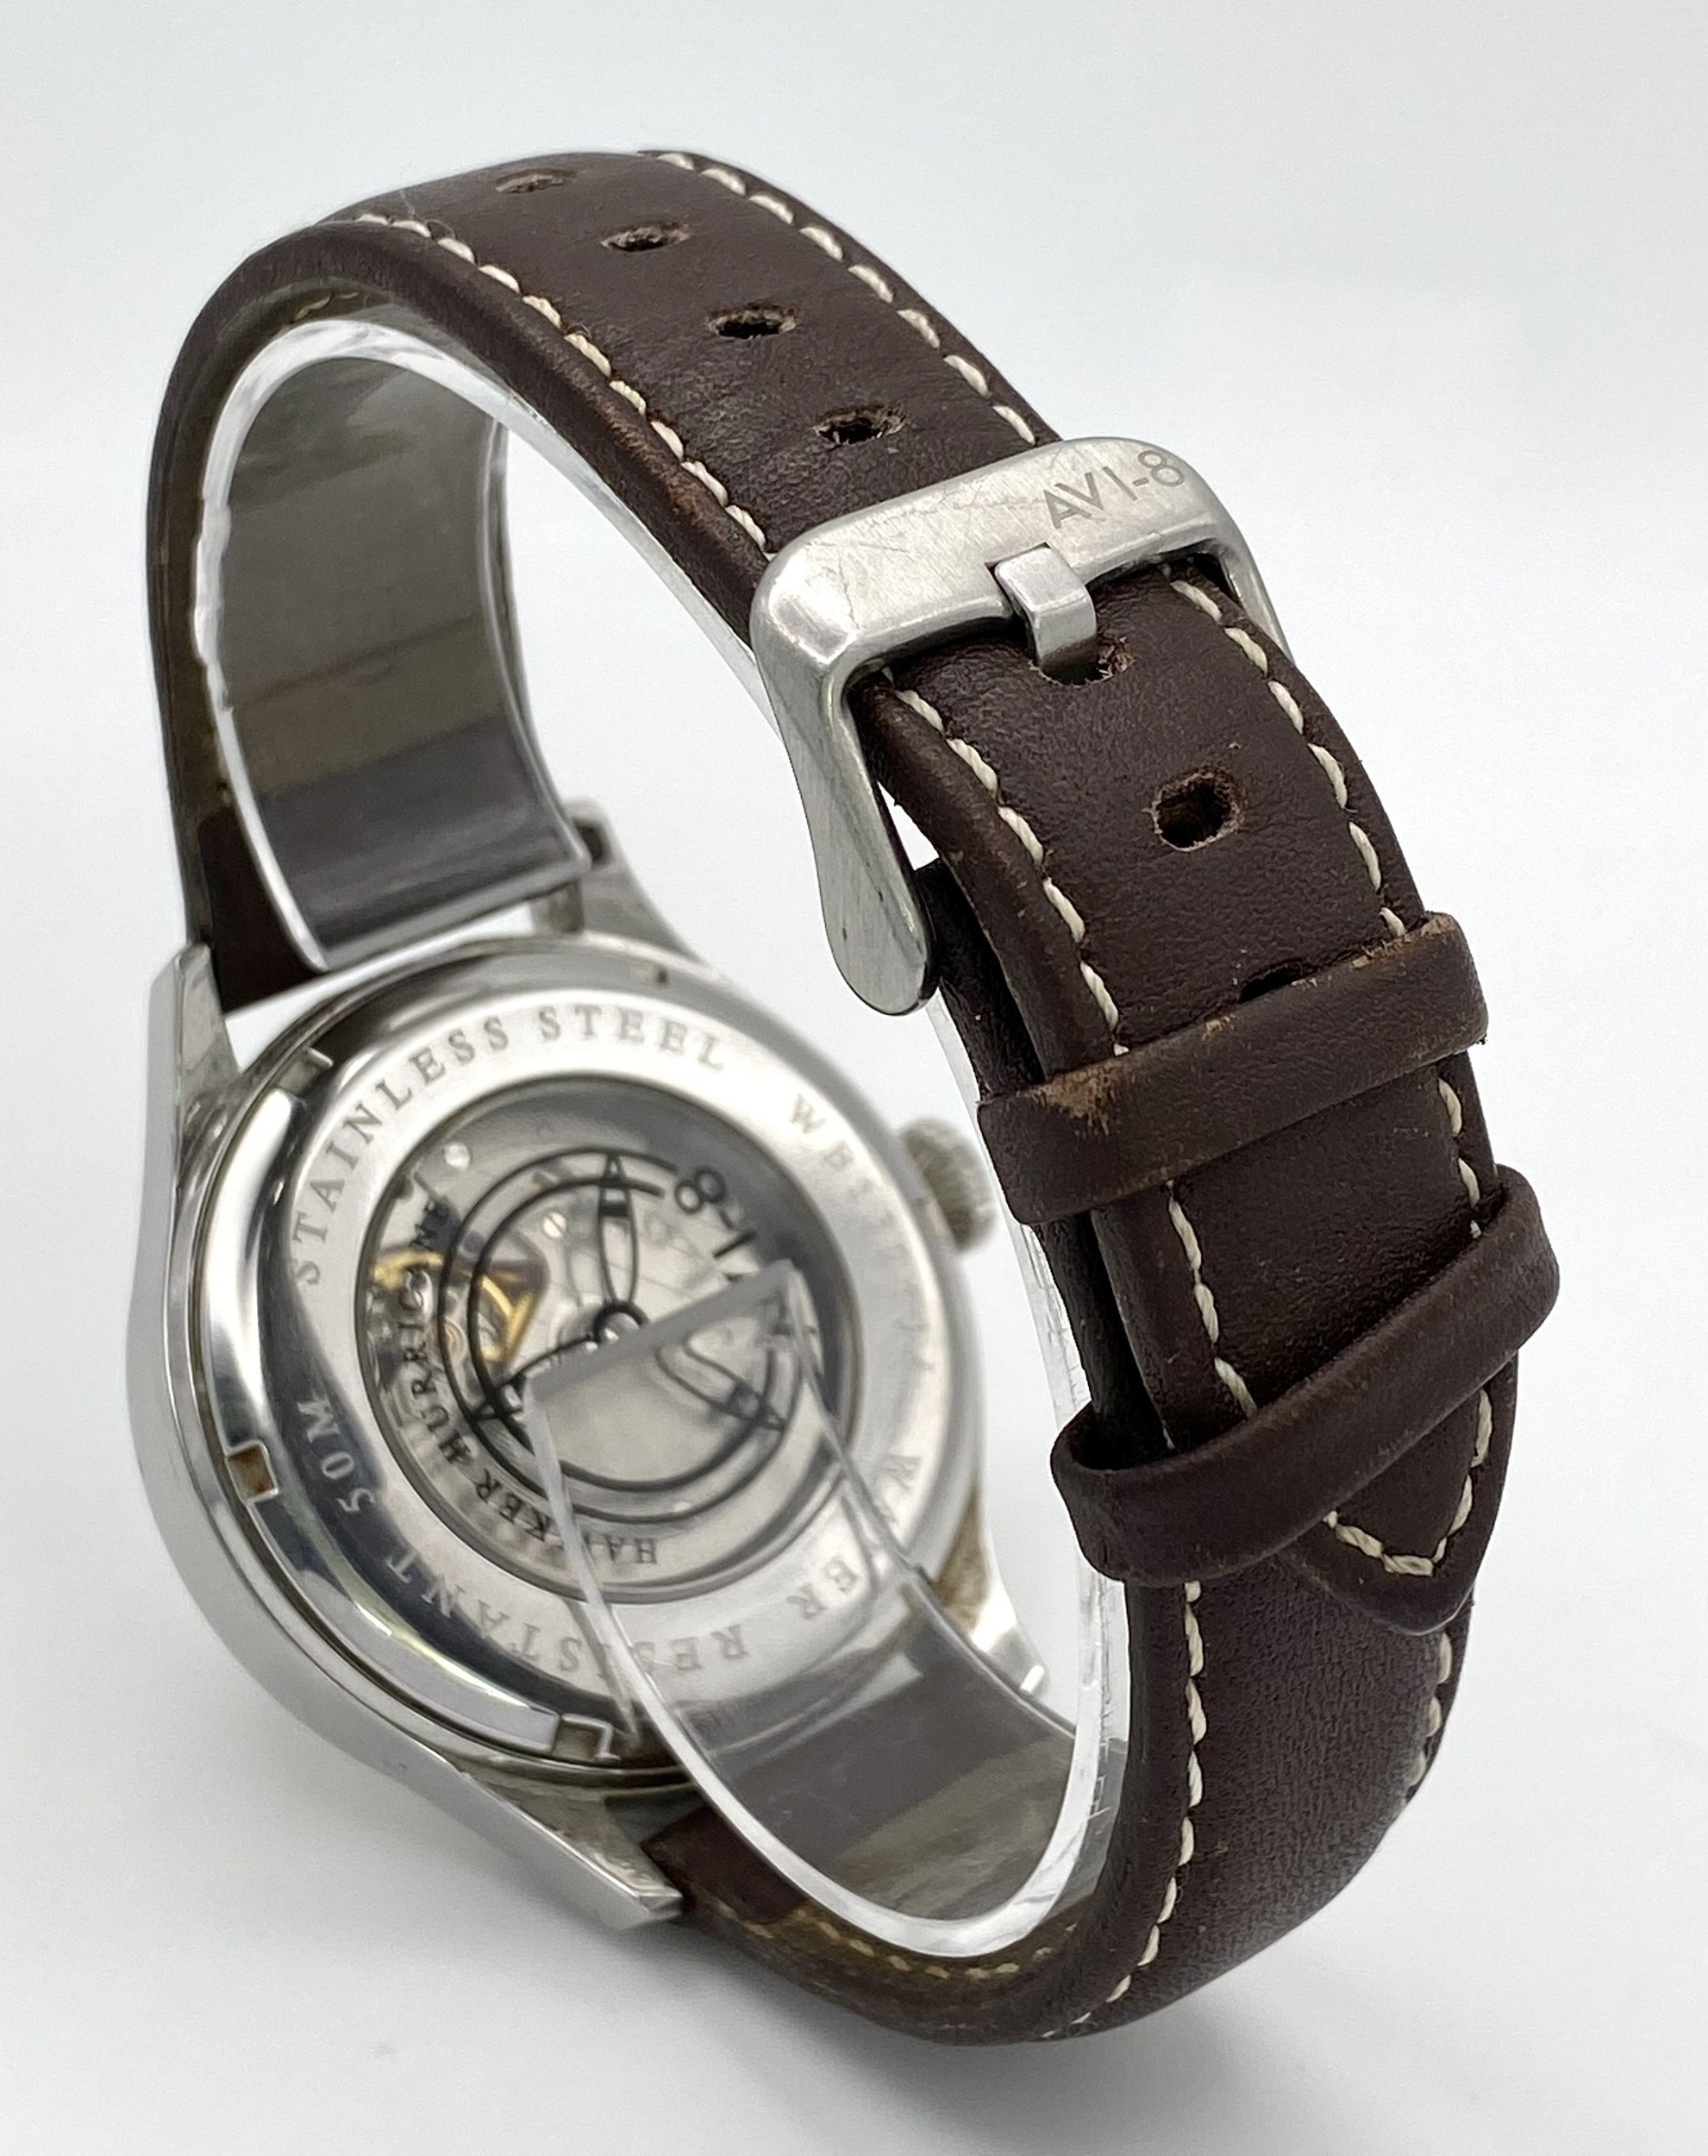 A Men’s ‘Hawker Hurricane’ Automatic Pilots Watch by AVI8. 47mm Including Crown. Full Working Order. - Image 5 of 9